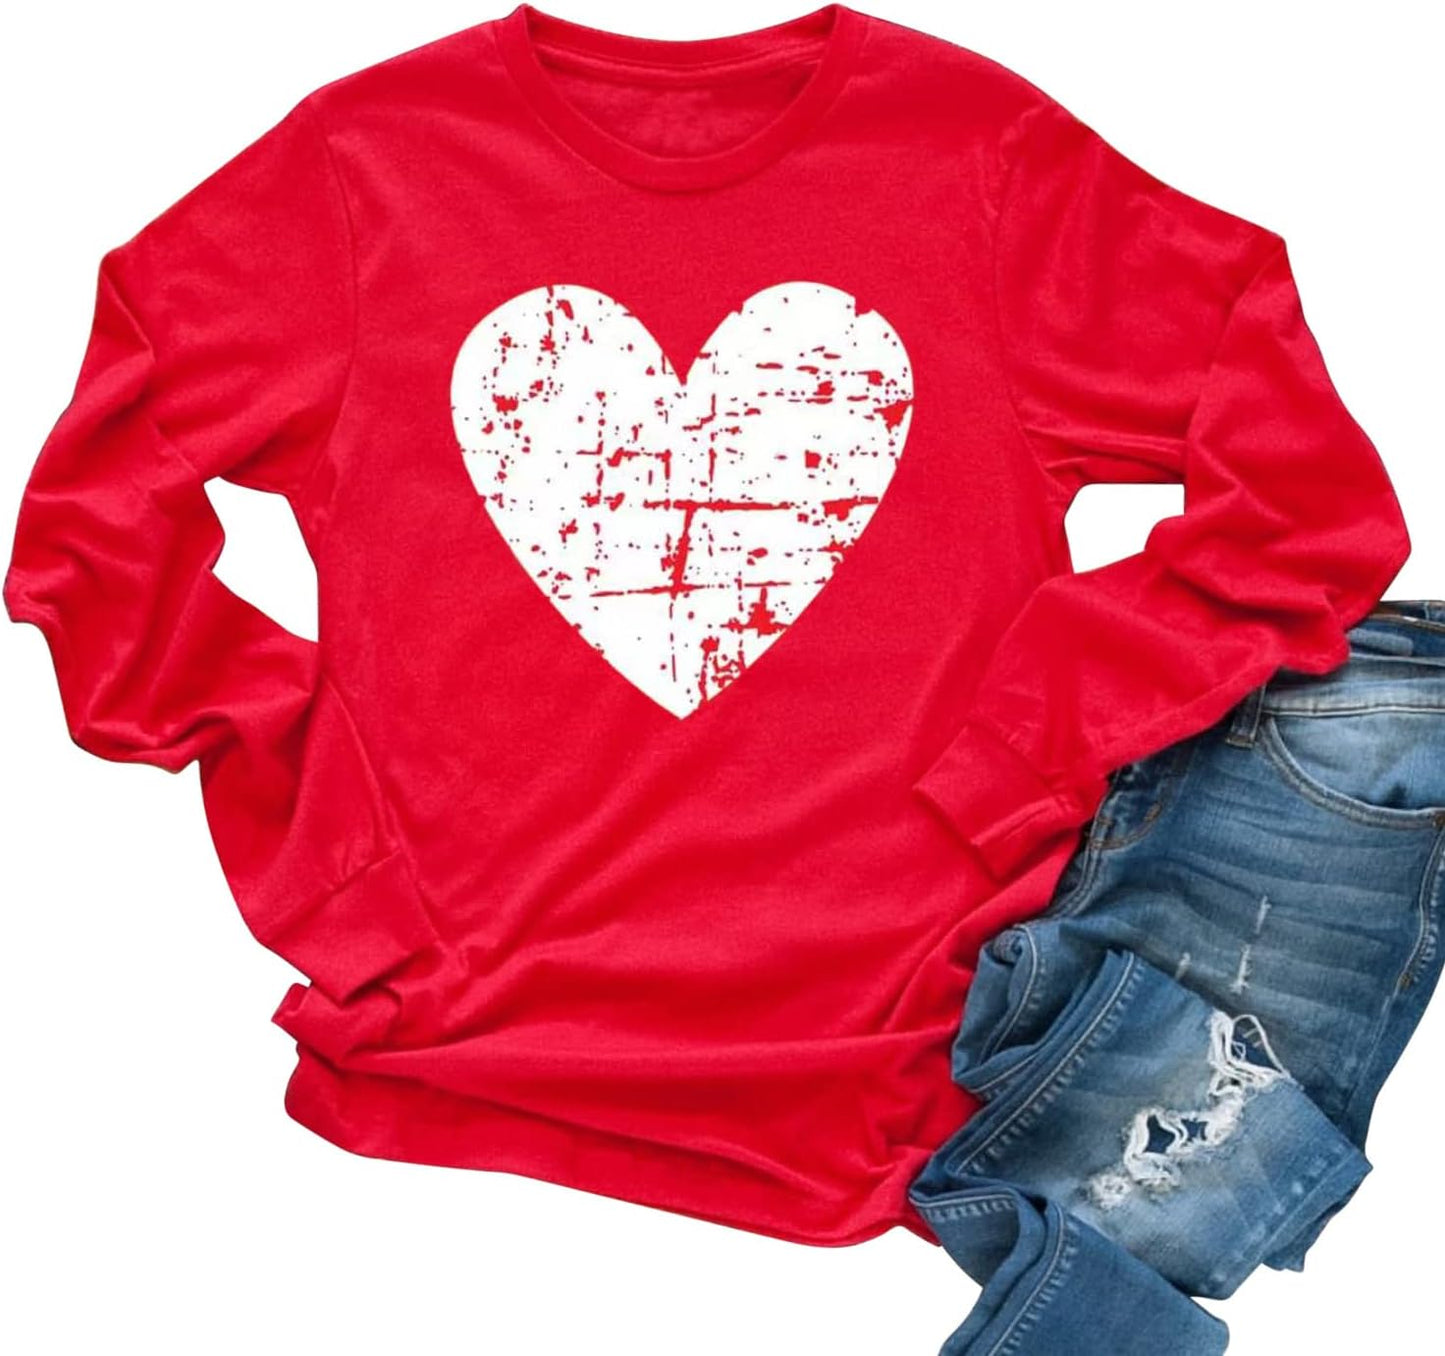 Raglans Long Sleeve Valentine's Day Graphic Tops